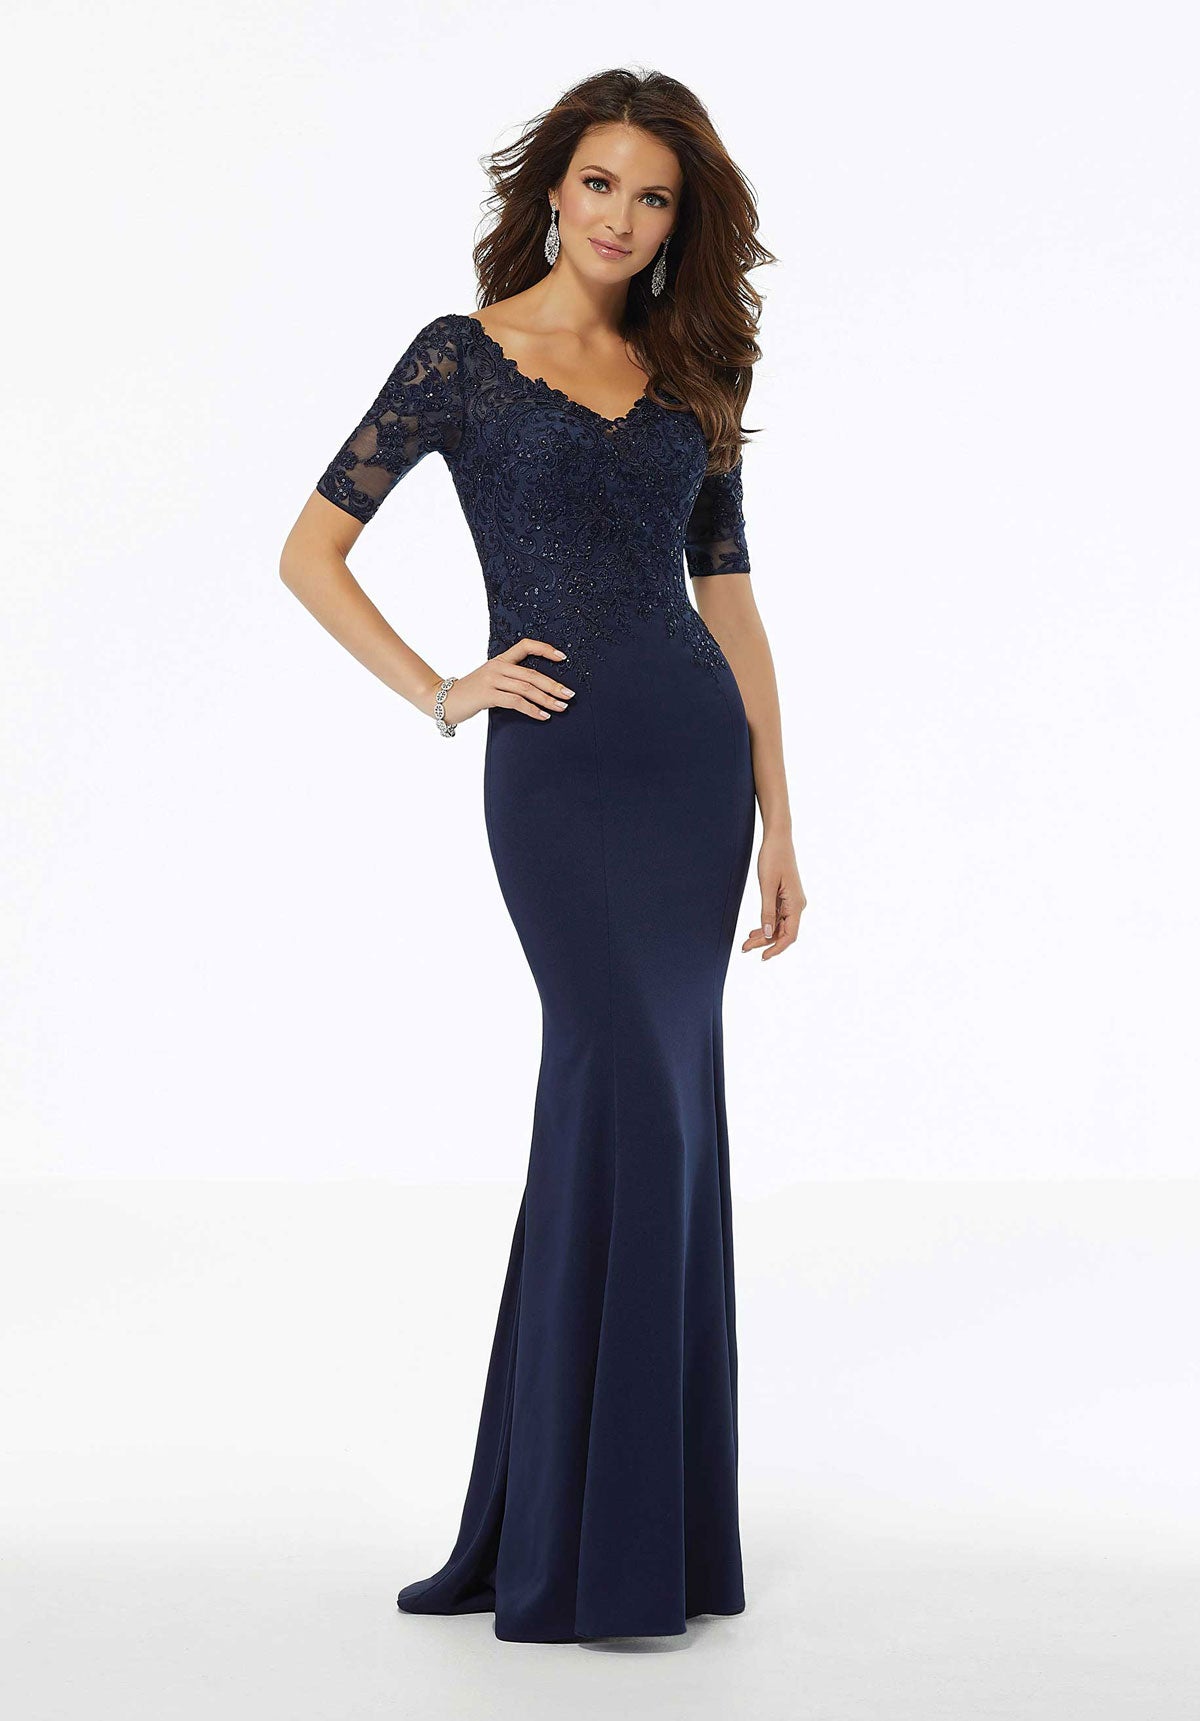 Last Dress In Store; Size: 8 Color: Champagne | MGNY - 72108